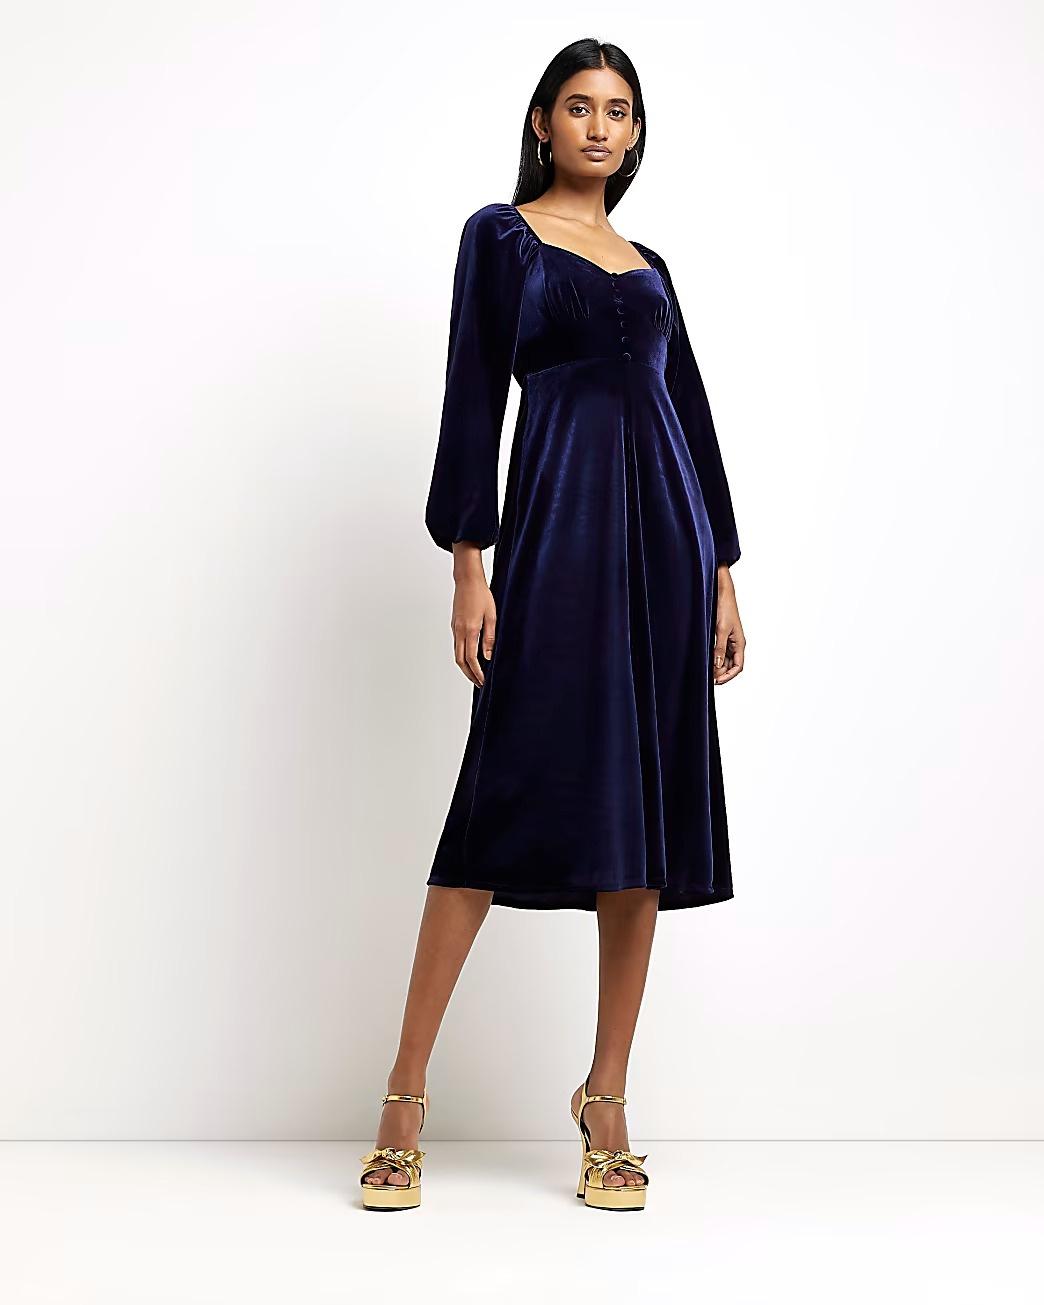 40 Chic Winter Wedding Guest Dresses for Every Budget - hitched.co.uk ...